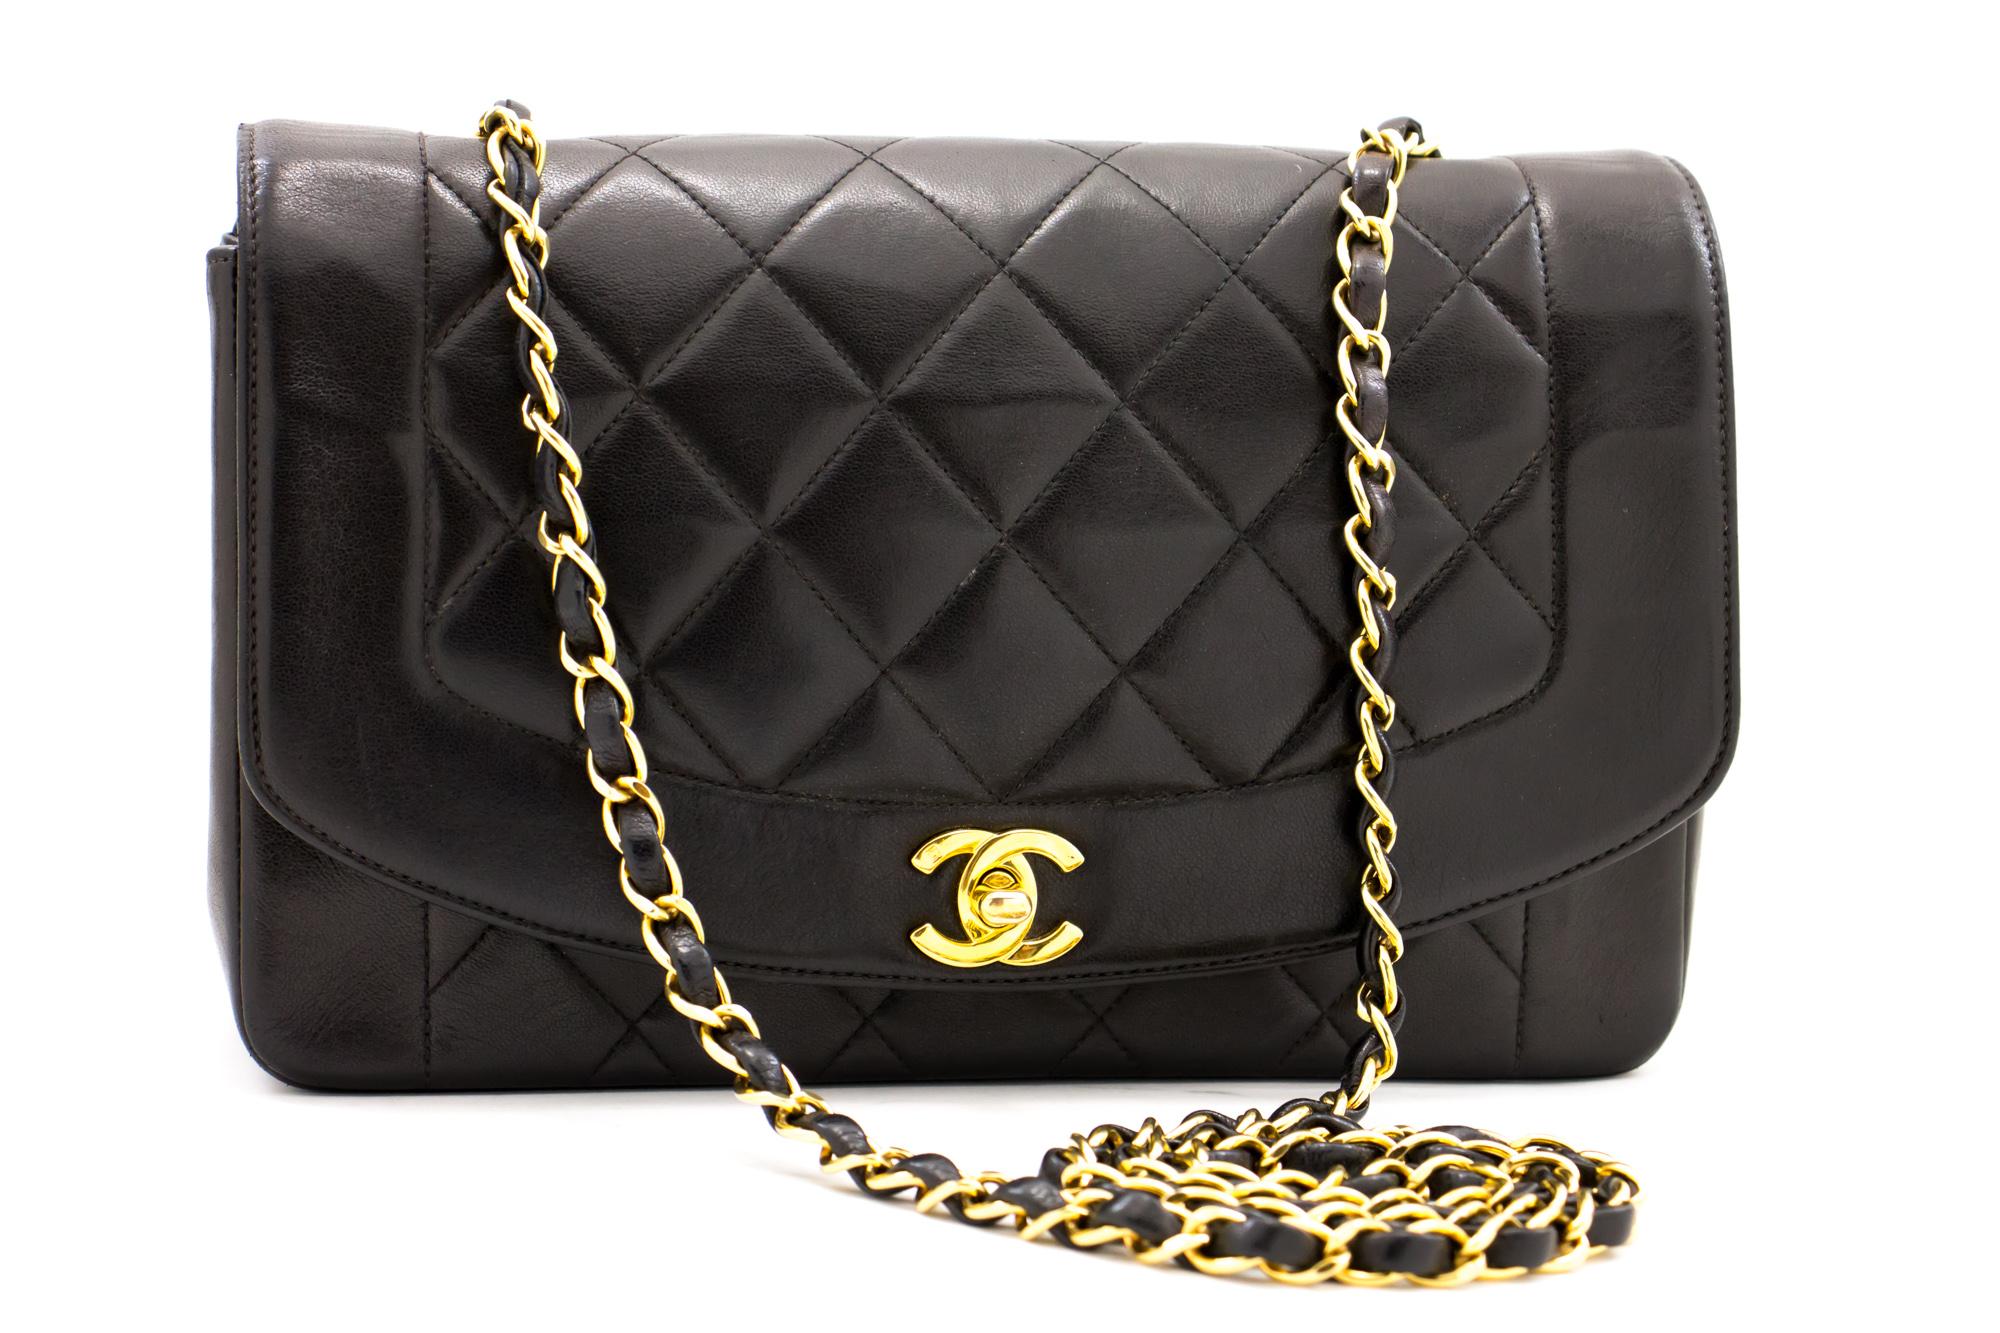 An authentic CHANEL Diana Flap Chain Shoulder Bag Crossbody Black Quilted Purse. The color is Black. The outside material is Leather. The pattern is Solid. This item is Vintage / Classic. The year of manufacture would be 1994-1996.
Conditions &